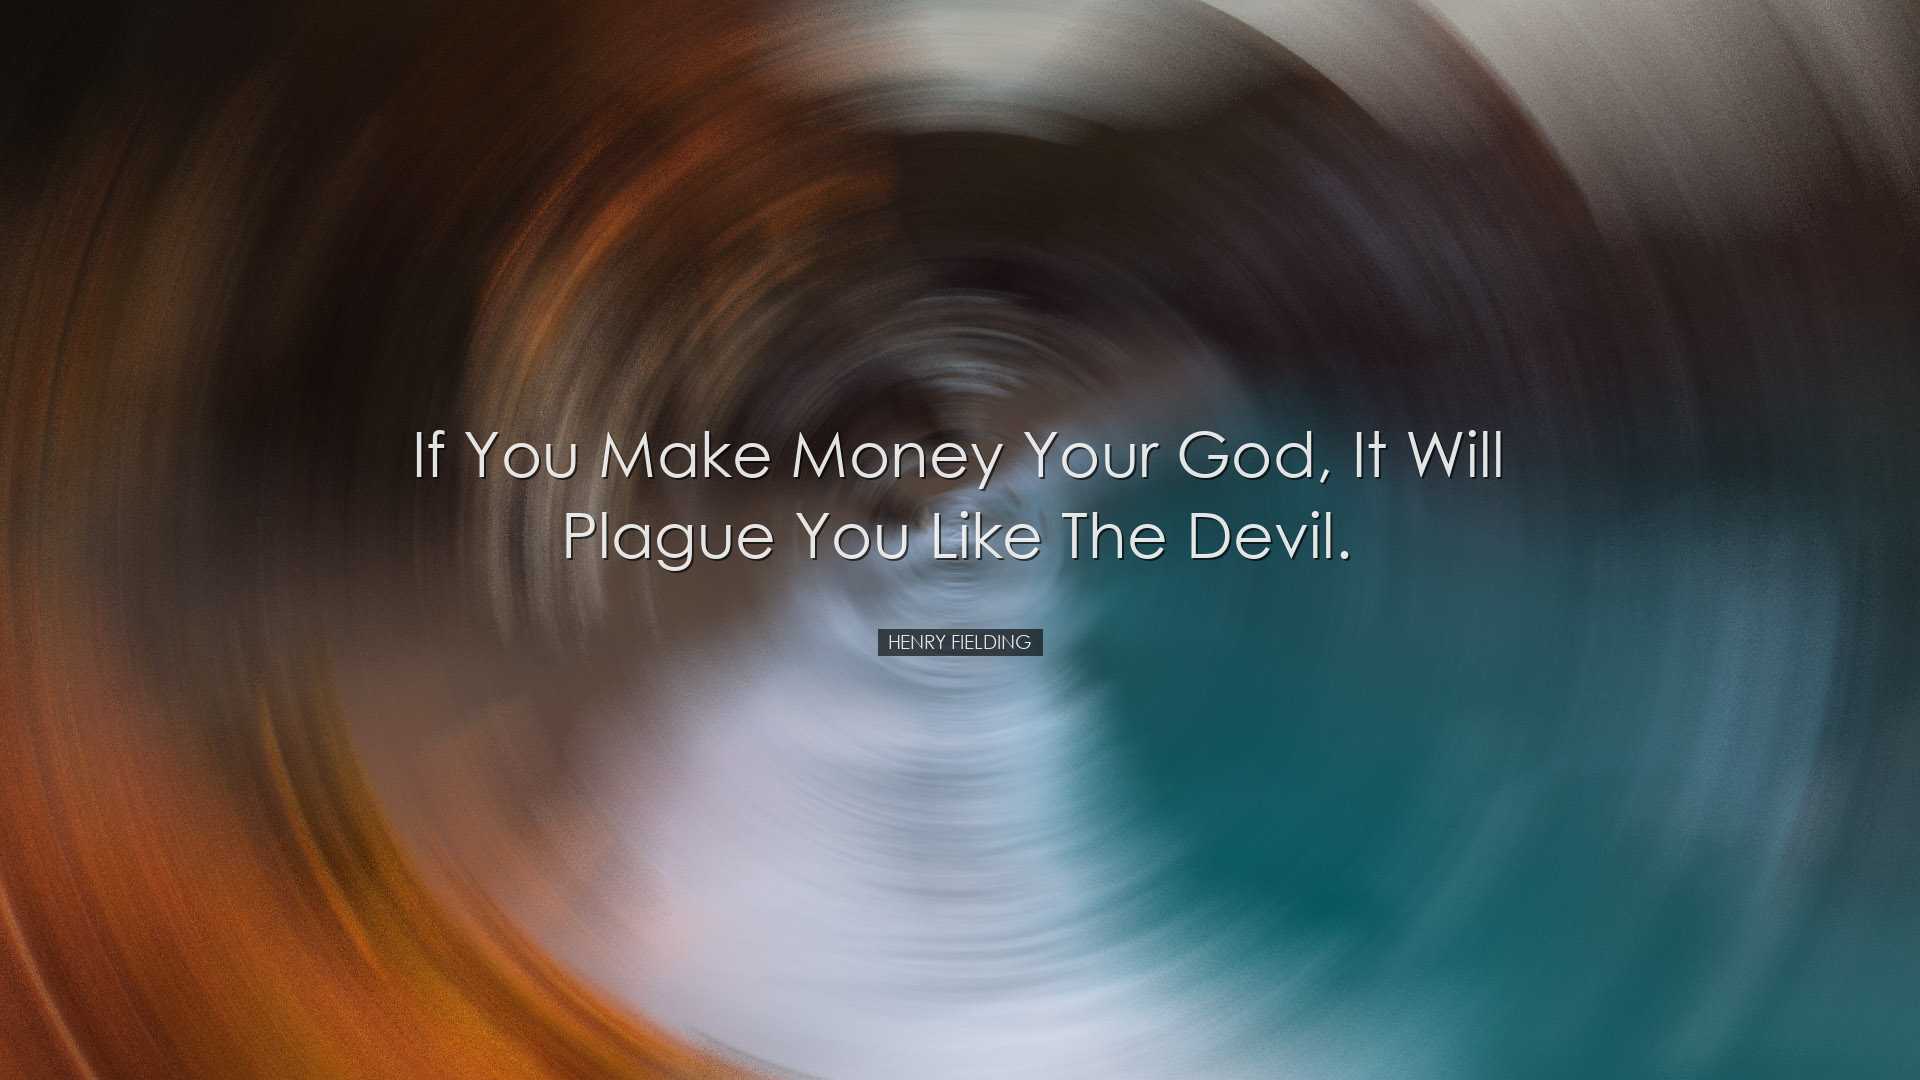 If you make money your god, it will plague you like the devil. - H